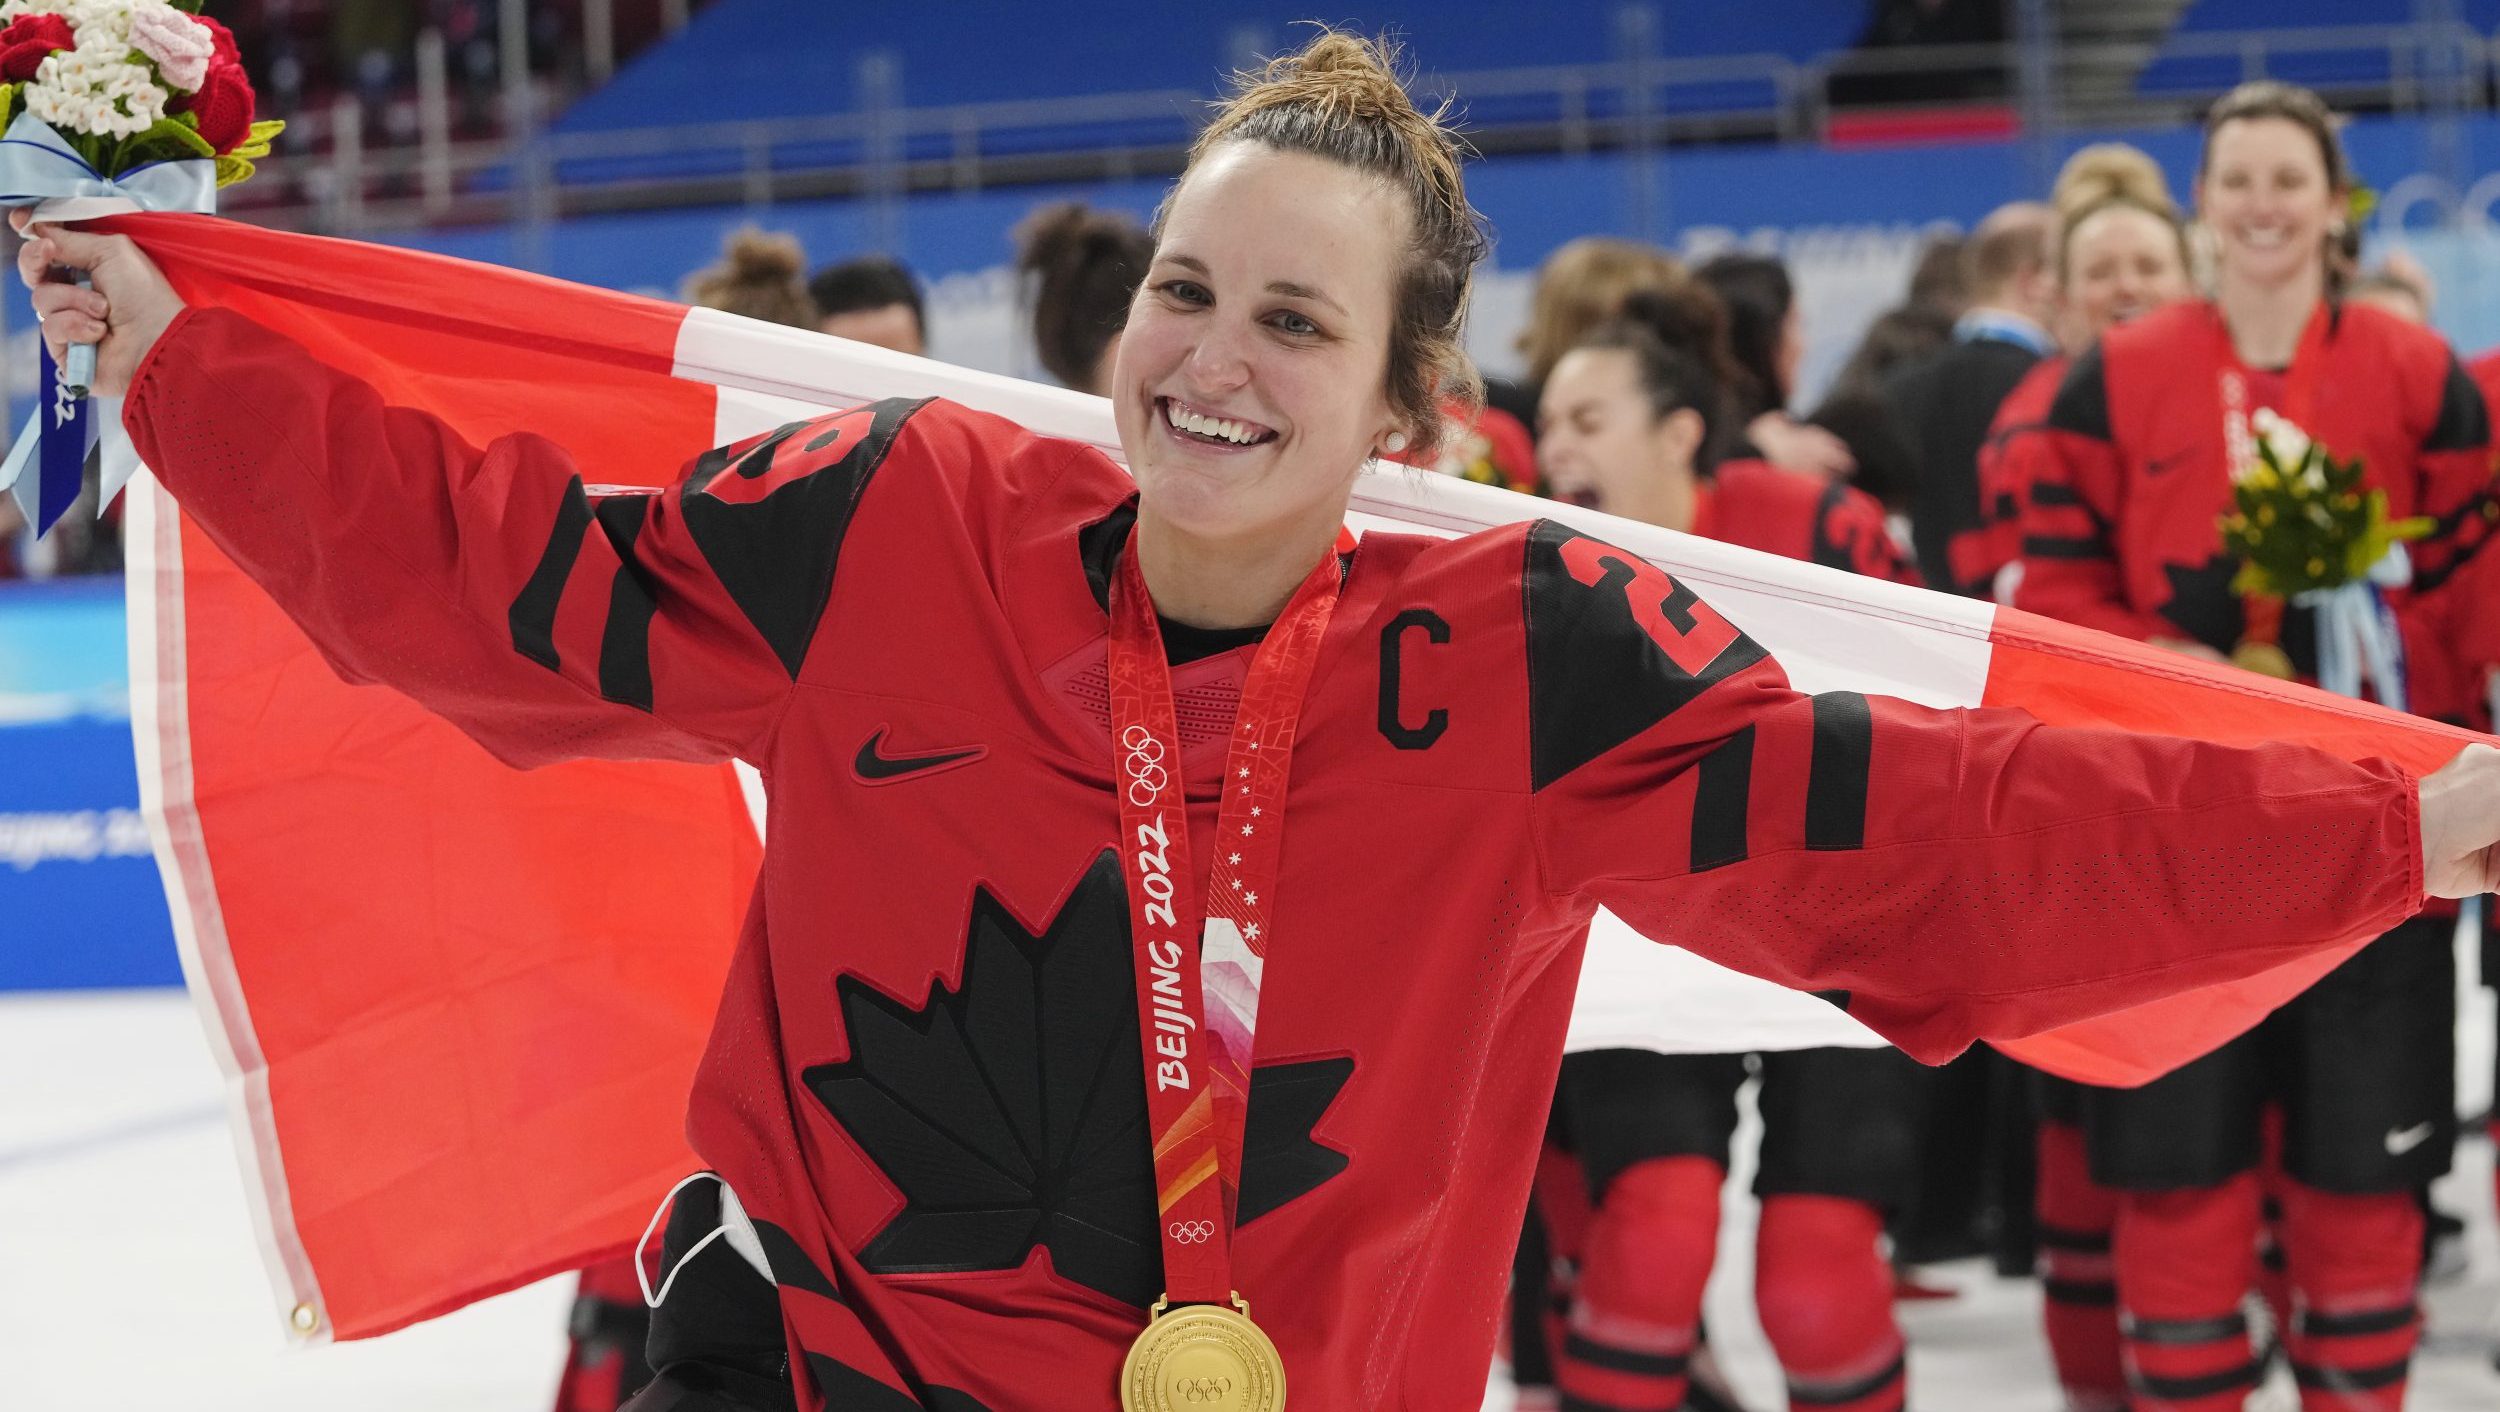 Air Canada on X: Congratulations to Air Canada athlete Marie-Philip Poulin  (@pou29), who's just been named Captain of @TeamCanada's women's hockey  team for @pyeongchang2018! Can't wait to see you lead the team